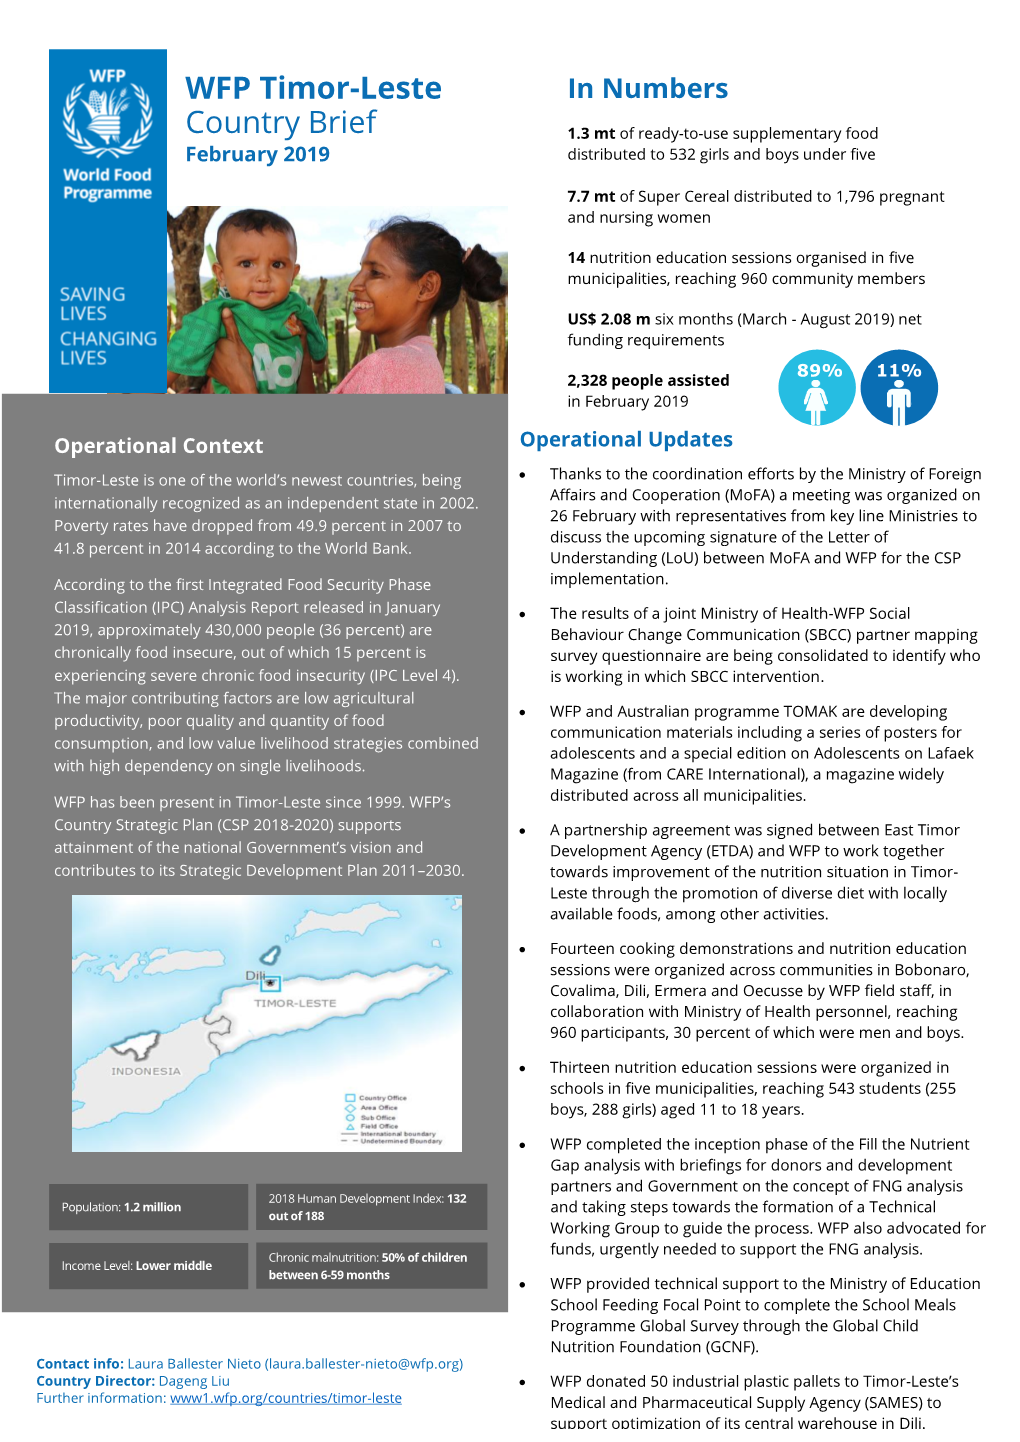 WFP Timor-Leste Country Brief February 2019 Government of Timor-Leste, SRAC/Multilateral Contributions, Private Donors